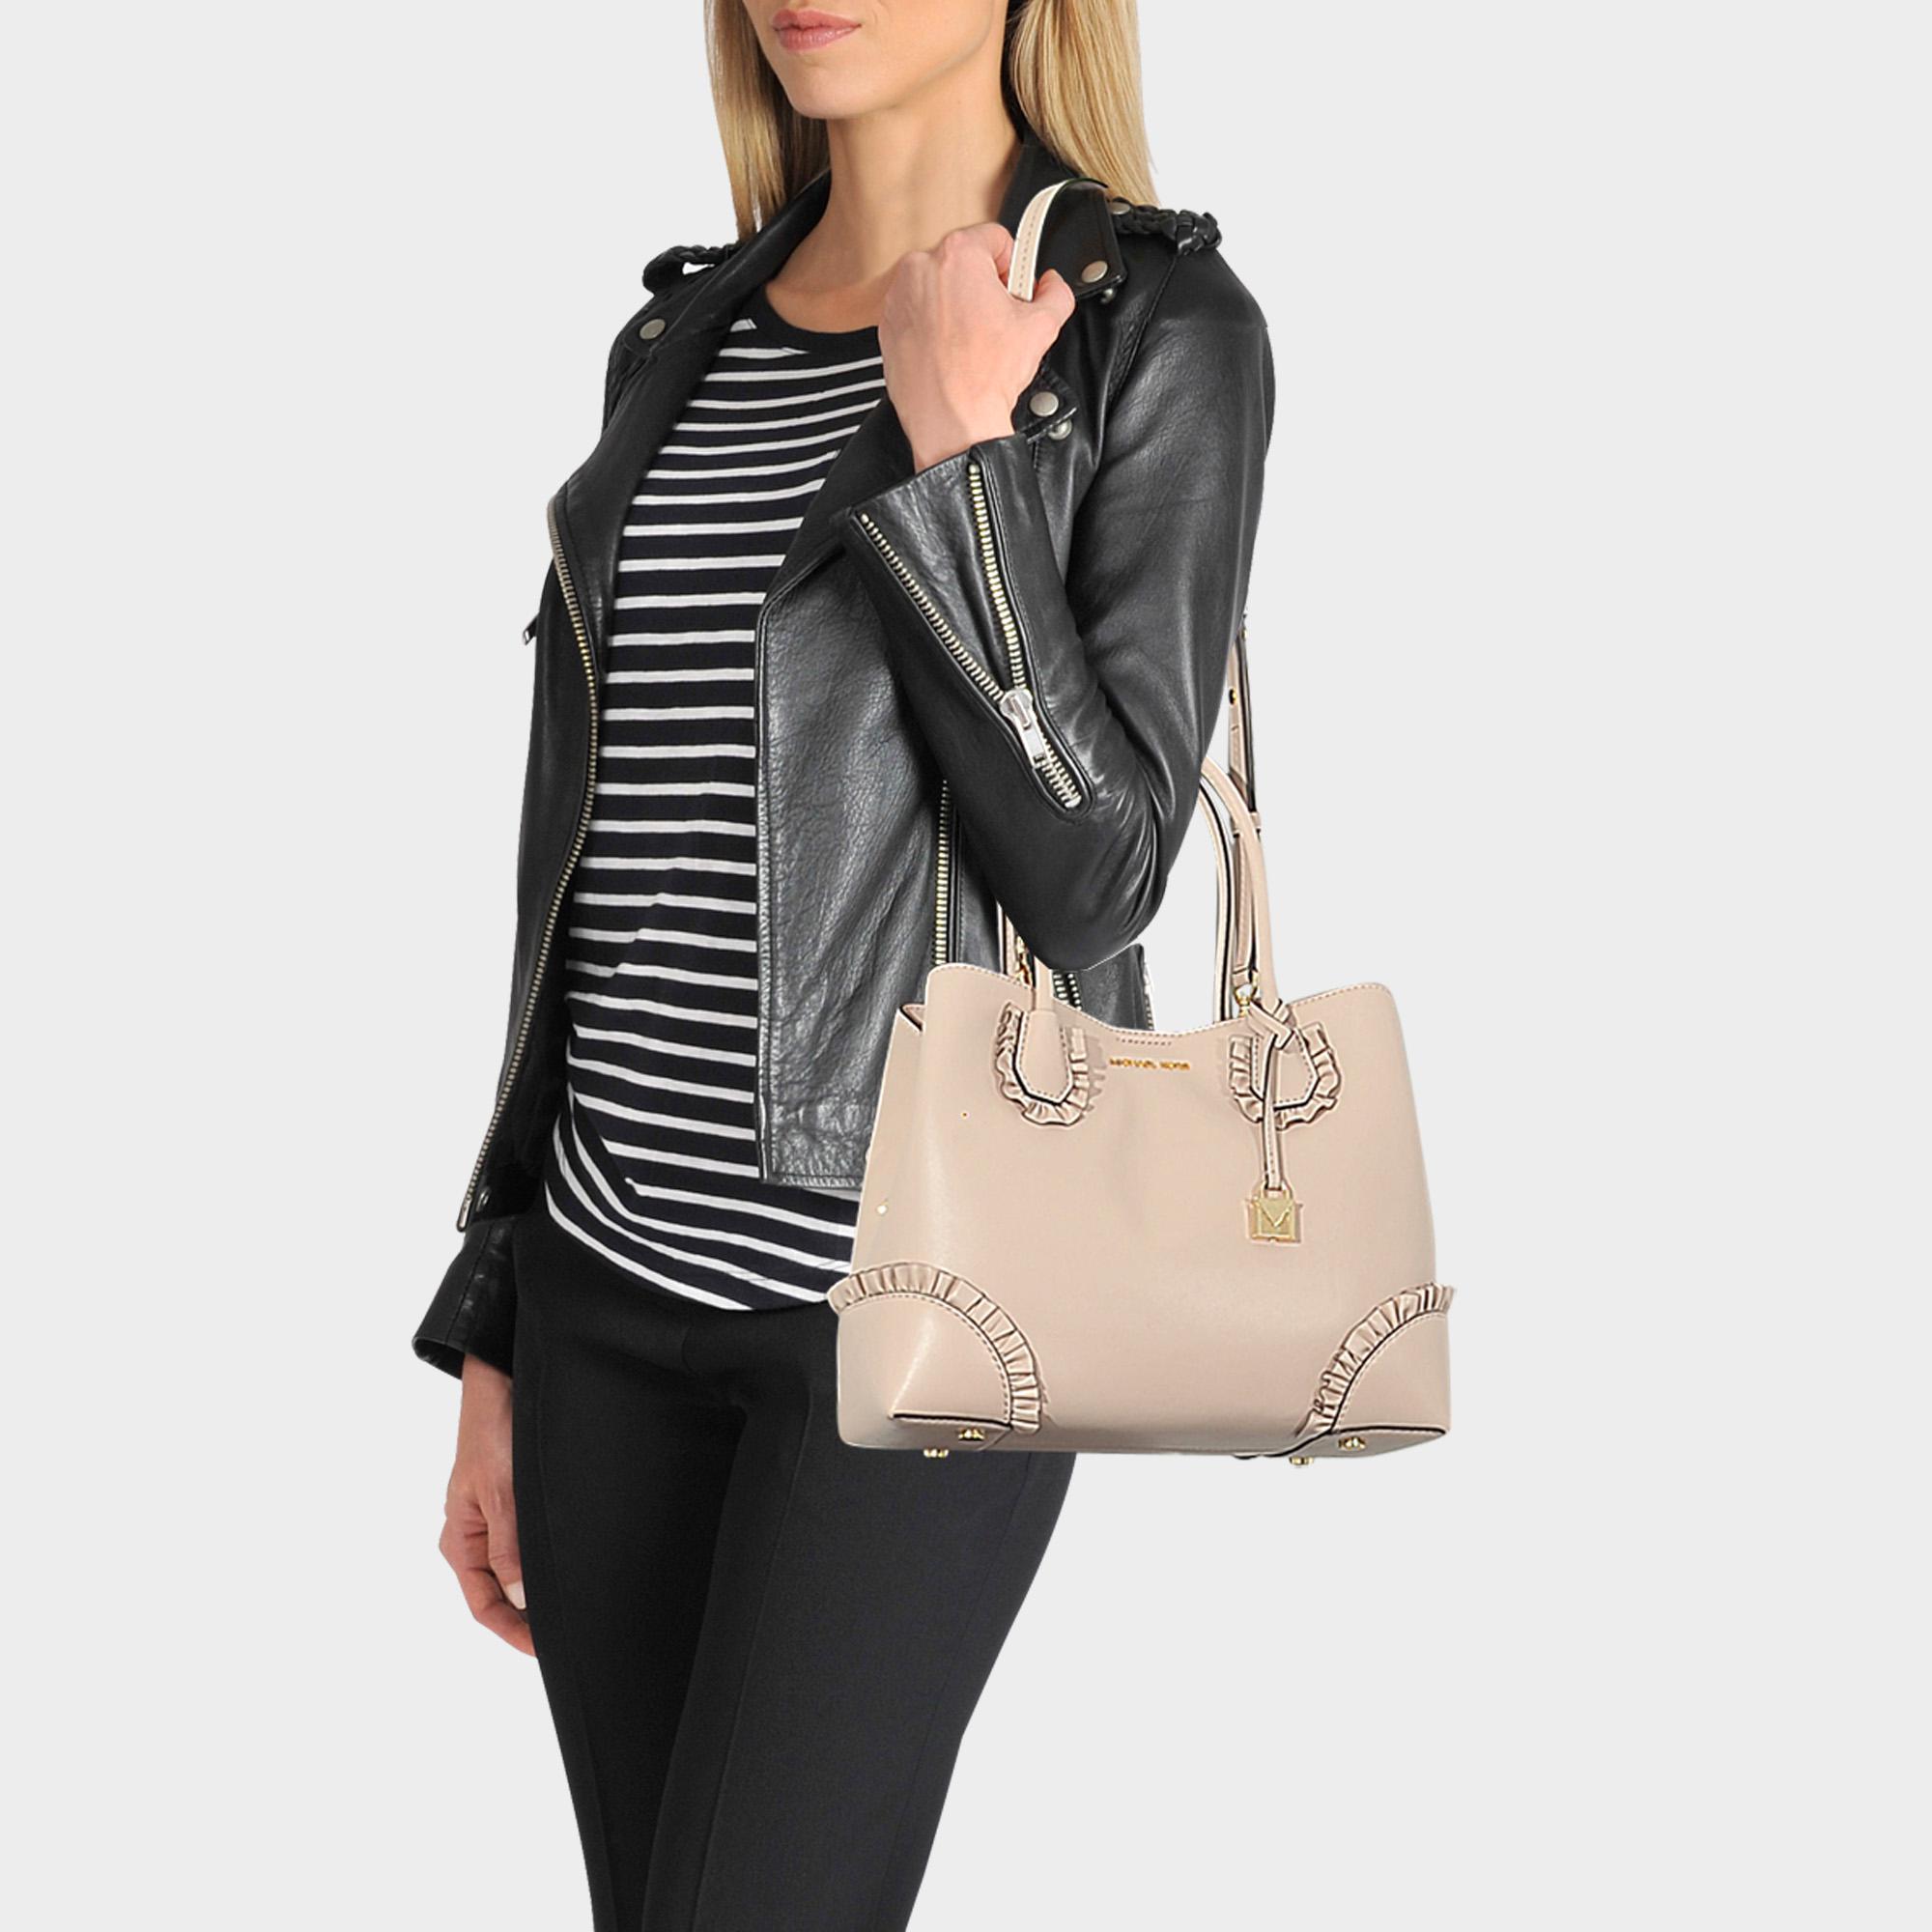 Mercer Gallery Medium Faux Leather Tote Bag